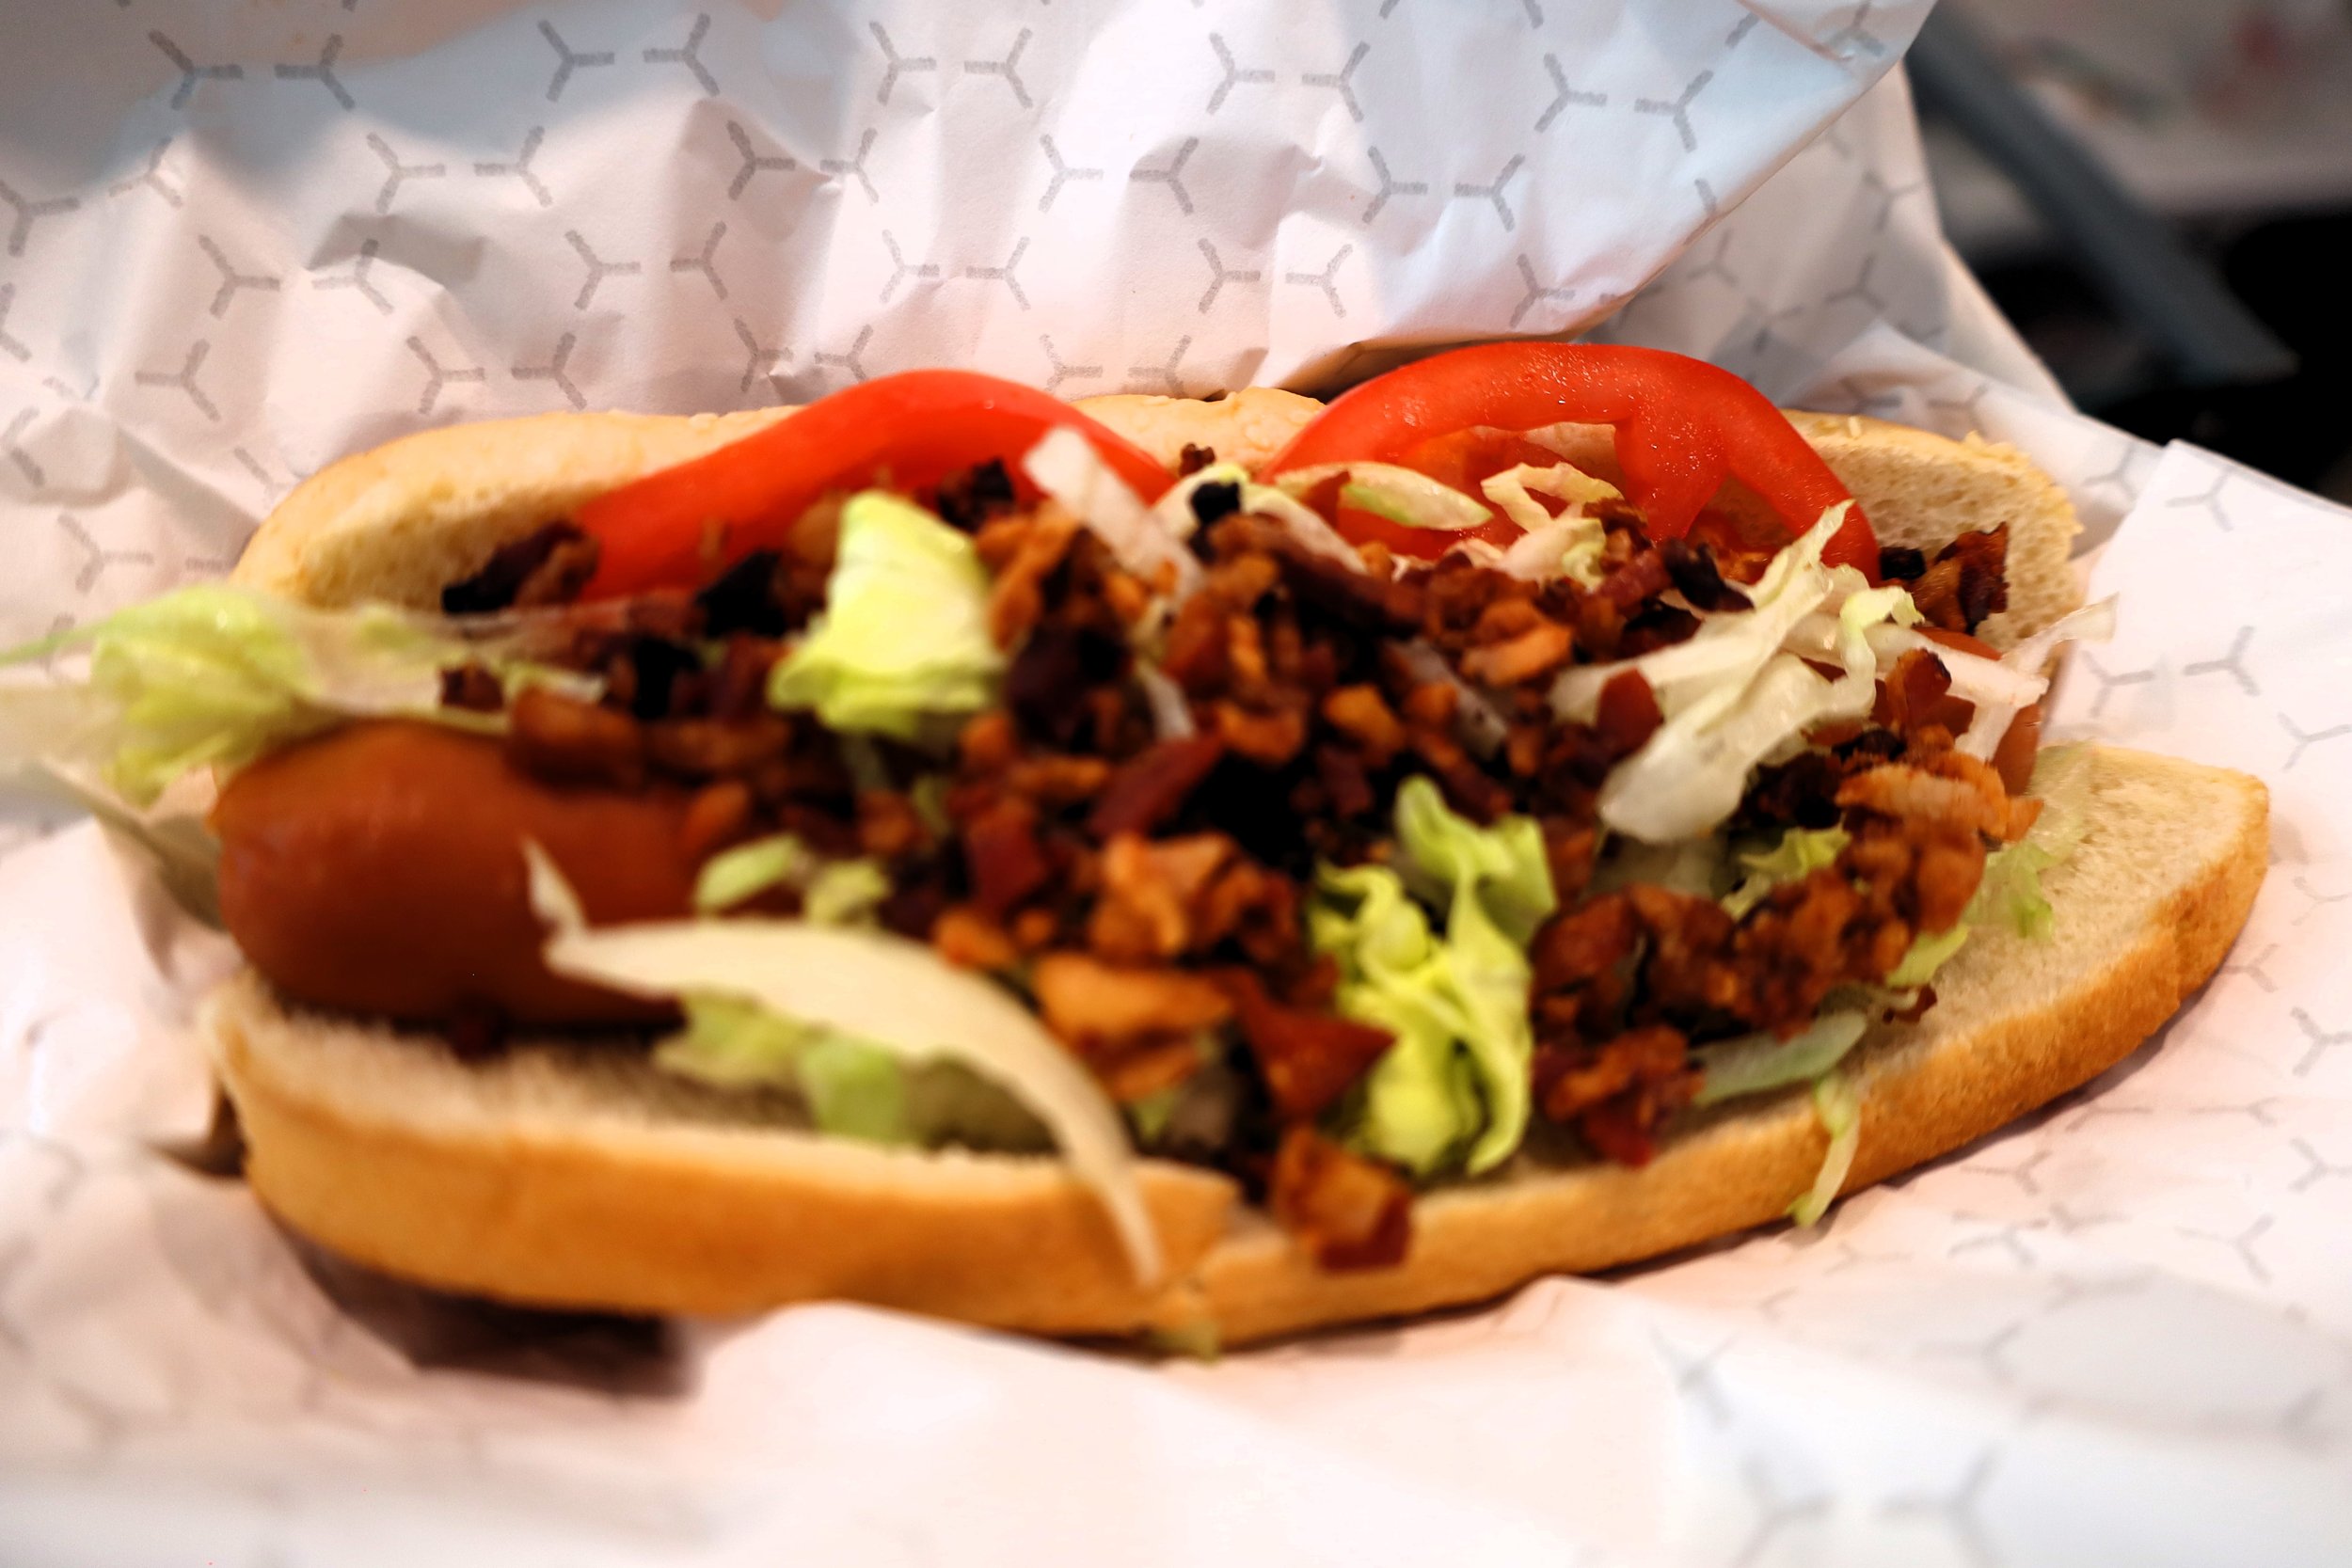 A San Fran dog consisting of bacon, lettuce, tomato and mayo (excluded). 